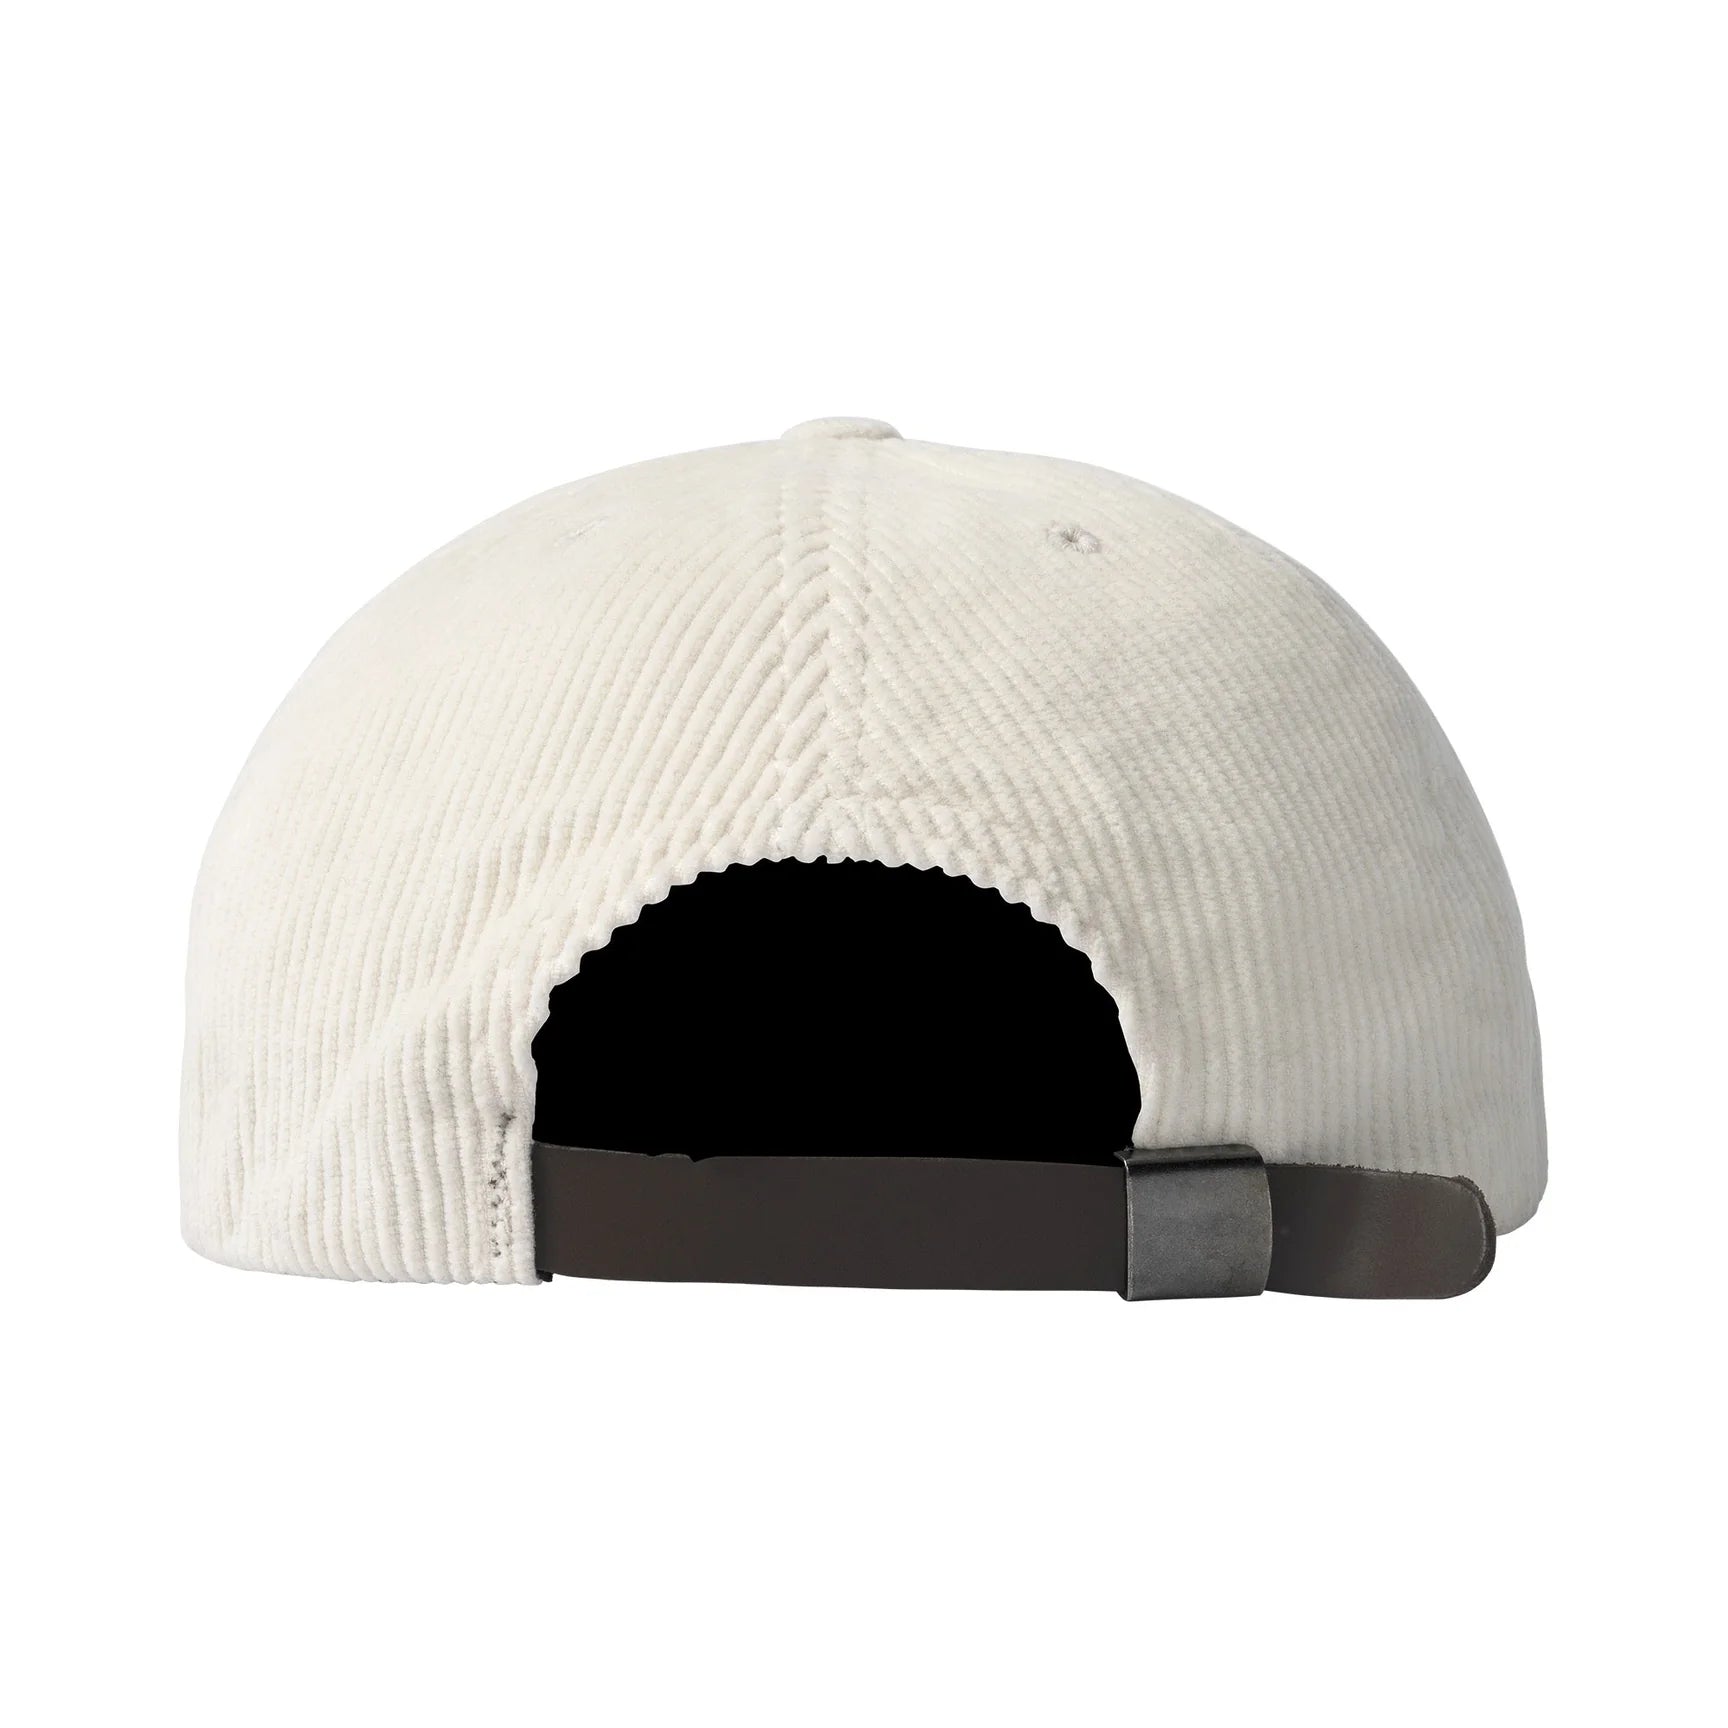 TIRED'S WASHED CORD CAP WHITE